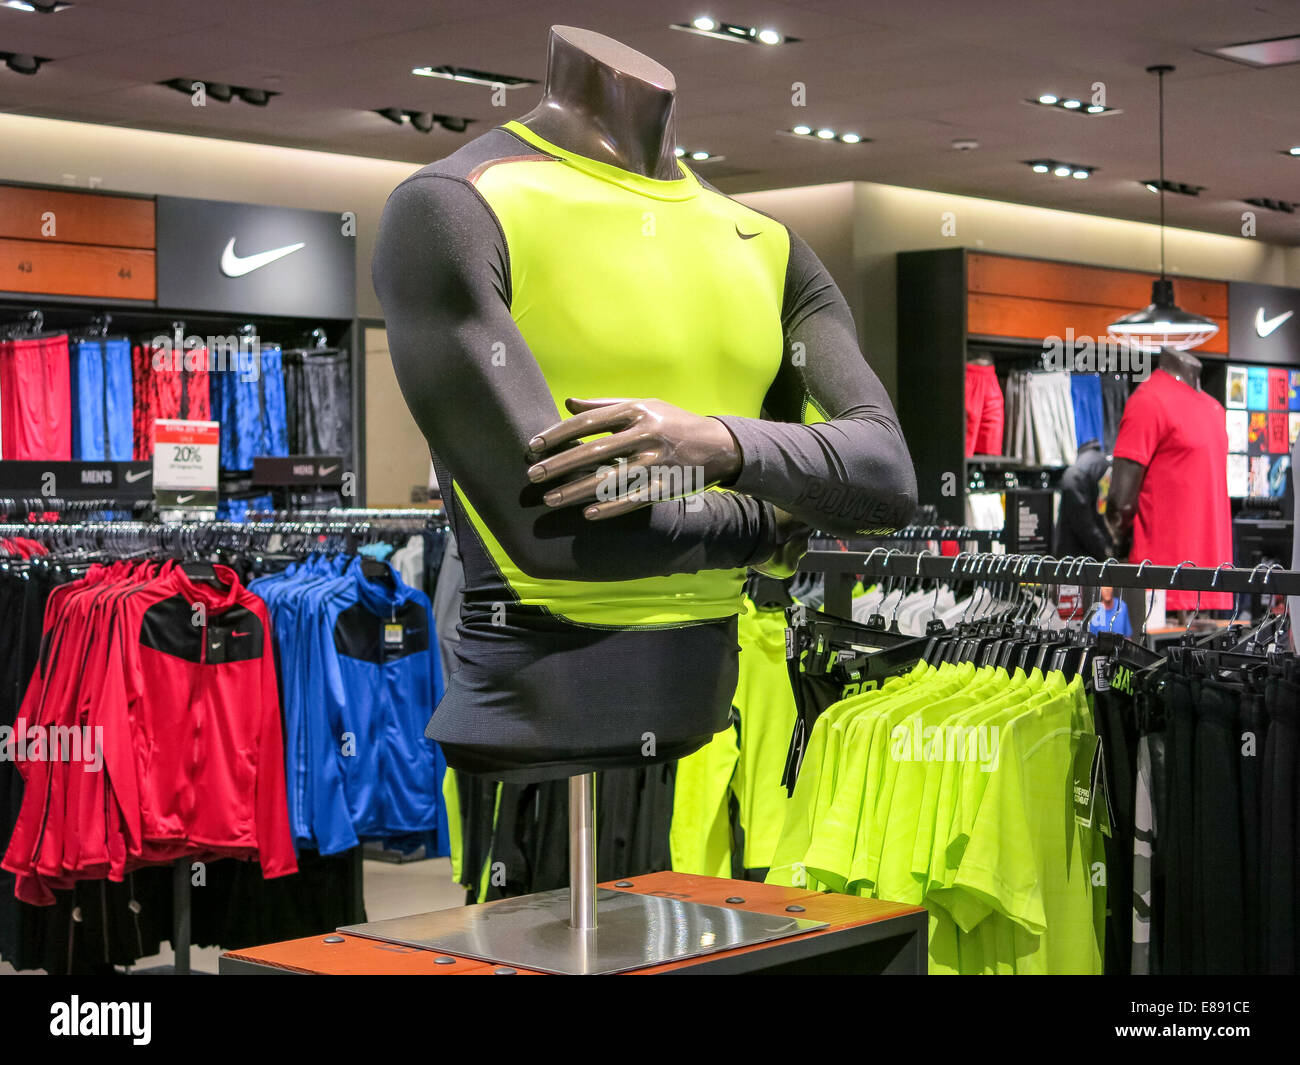 nike store clothes